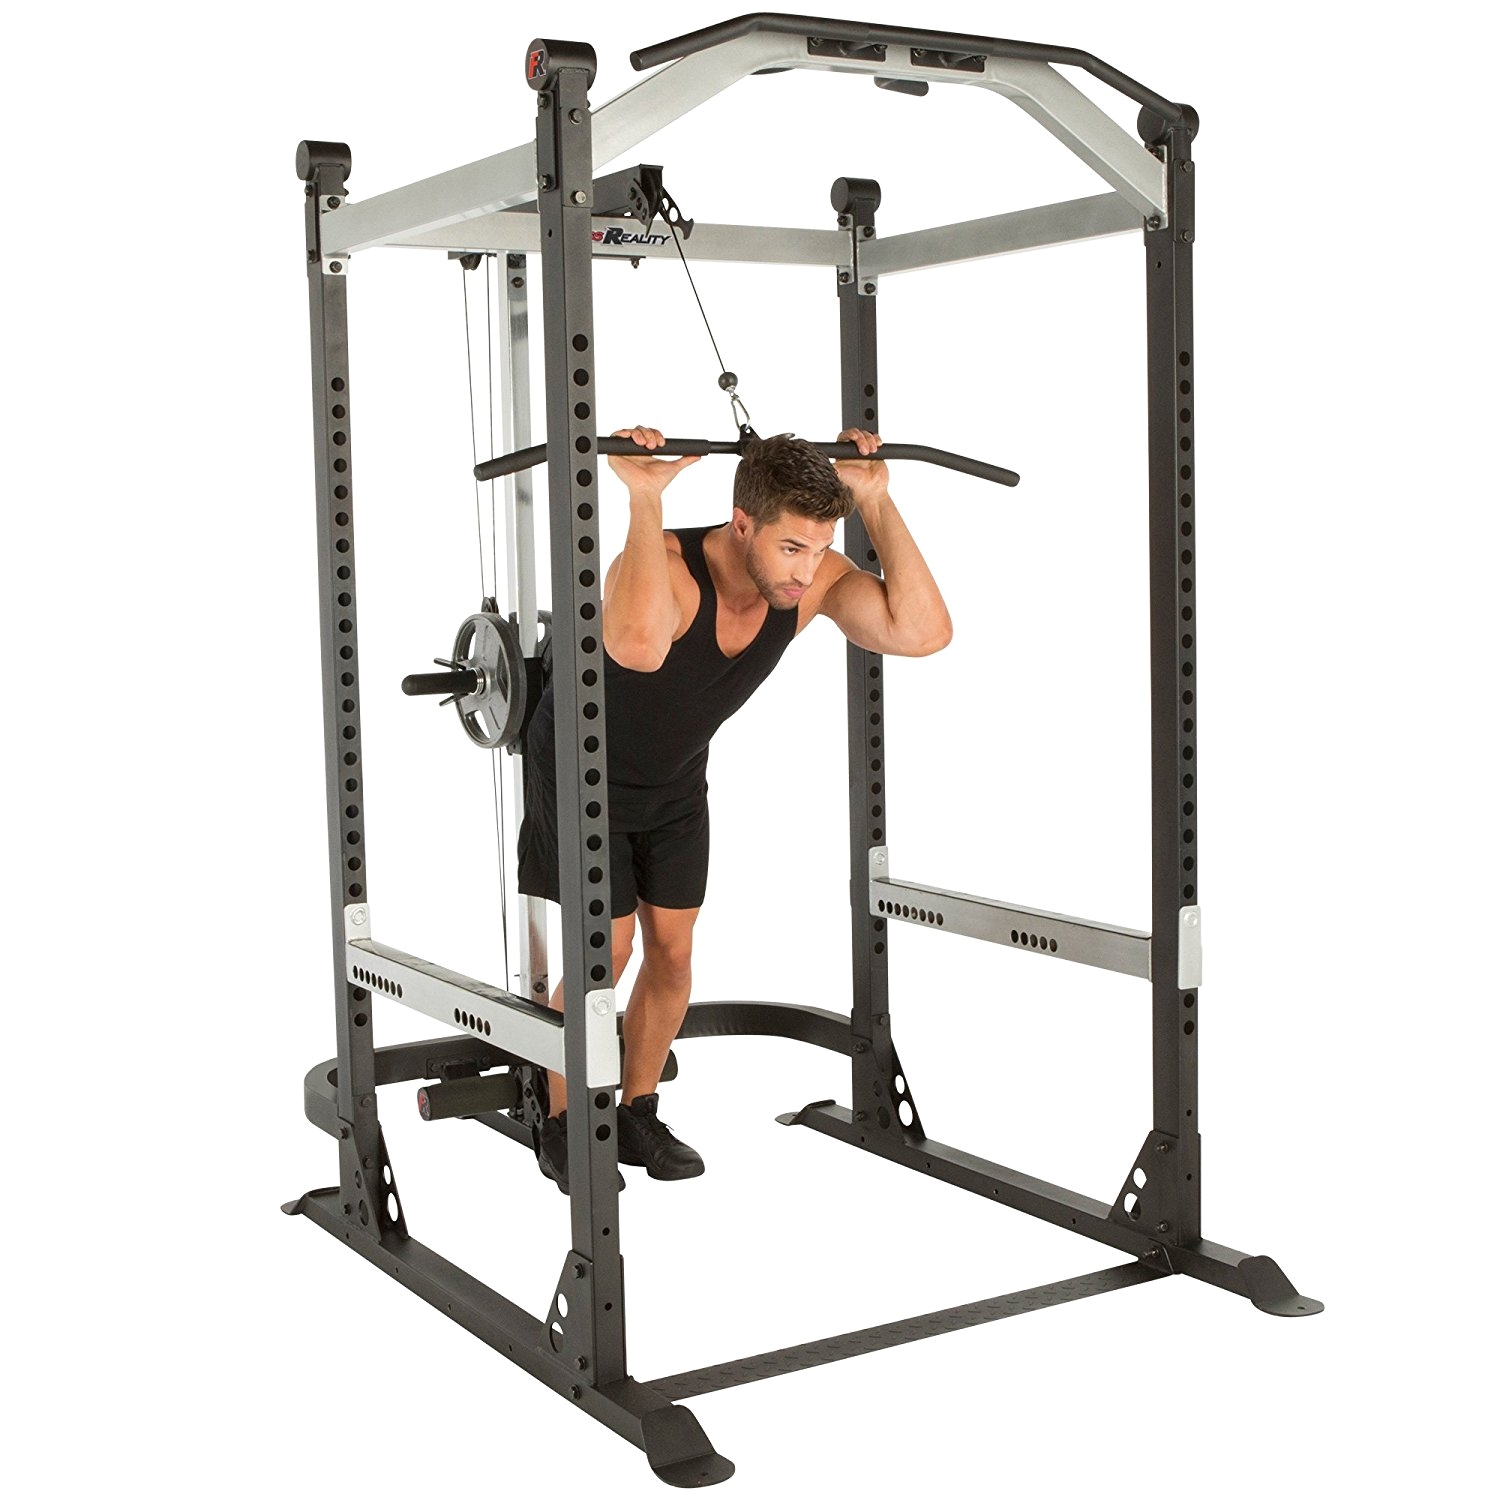 Cap Barbell Power Rack Exercise Stand Weight Capacity Amazon Com Fitness Reality X Class Light Commercial High Capacity